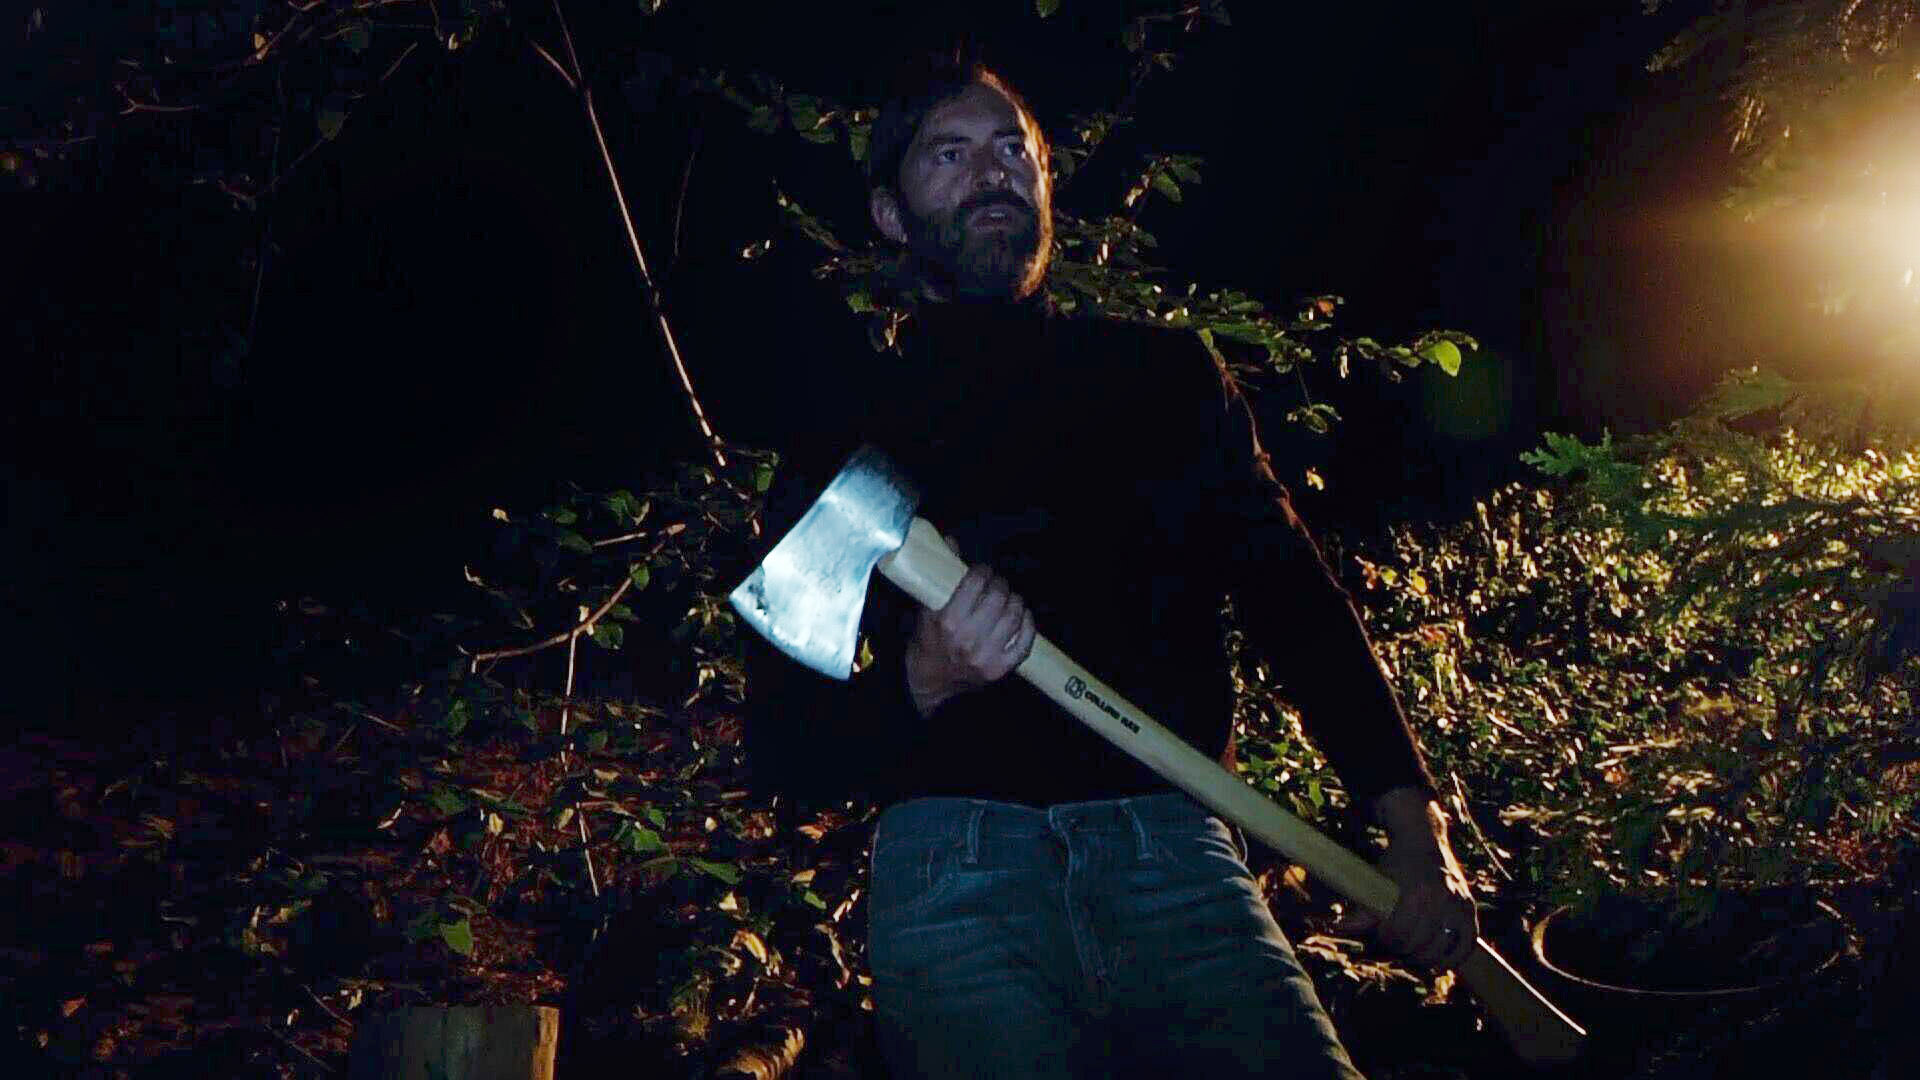 CREEP 2, Mark Duplass, 2017. Theatrical distributor: The Orchard / © Netflix/Courtesy Everett Collection